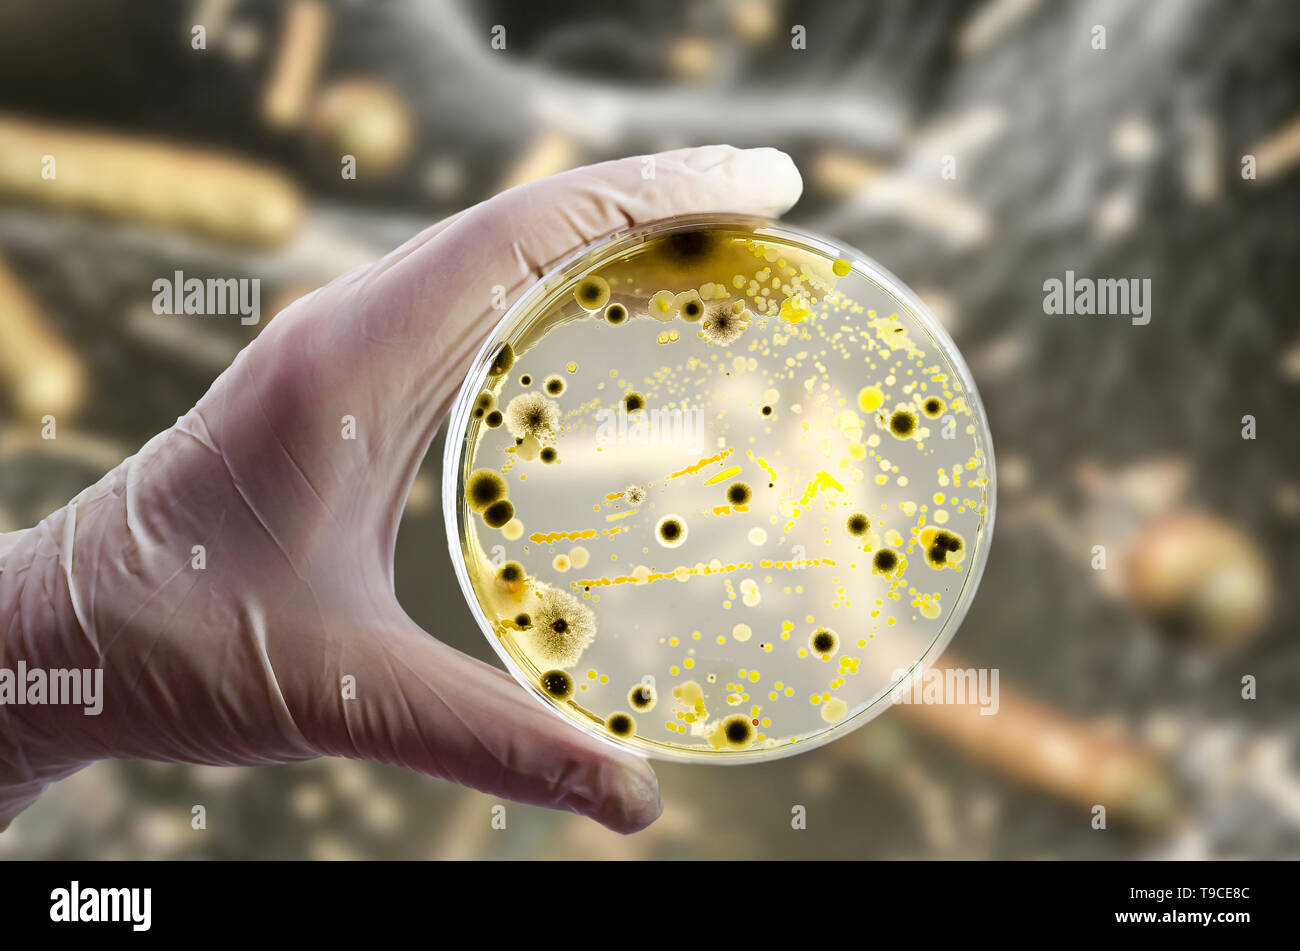 Bacterial and fungal cultures, composite image Stock Photo